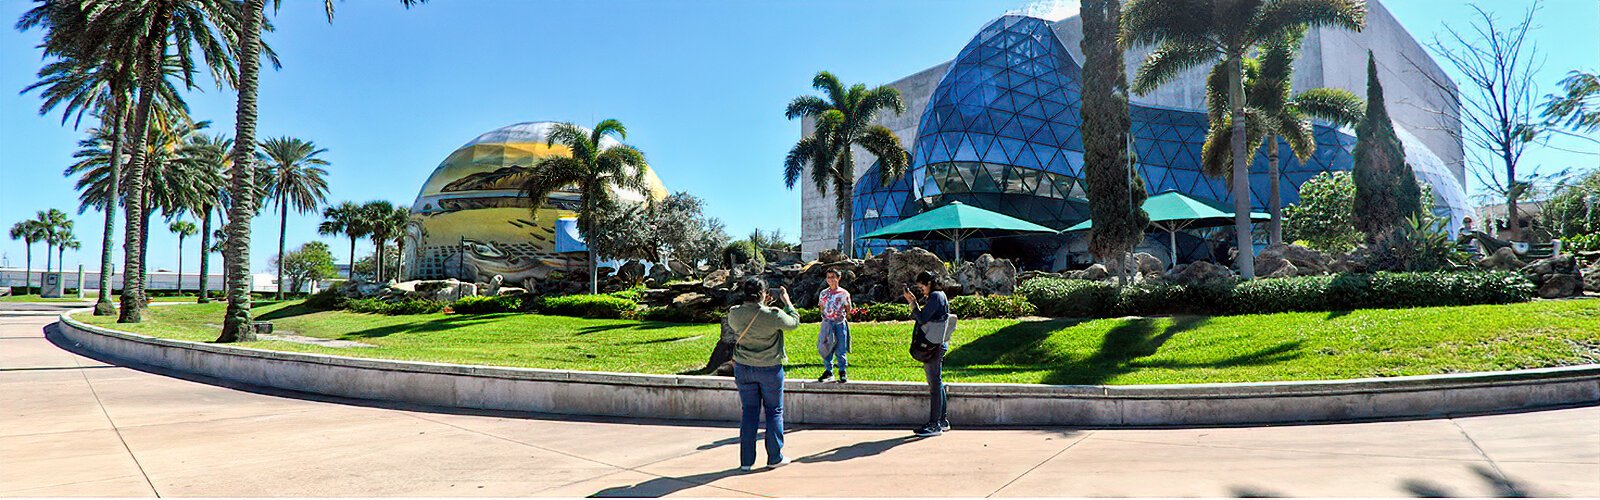 The Dali Museum, which celebrates the life and art of the surrealist artist Salvador Dali, provides a beautiful backdrop for a family picture on St. Pete’s waterfront.